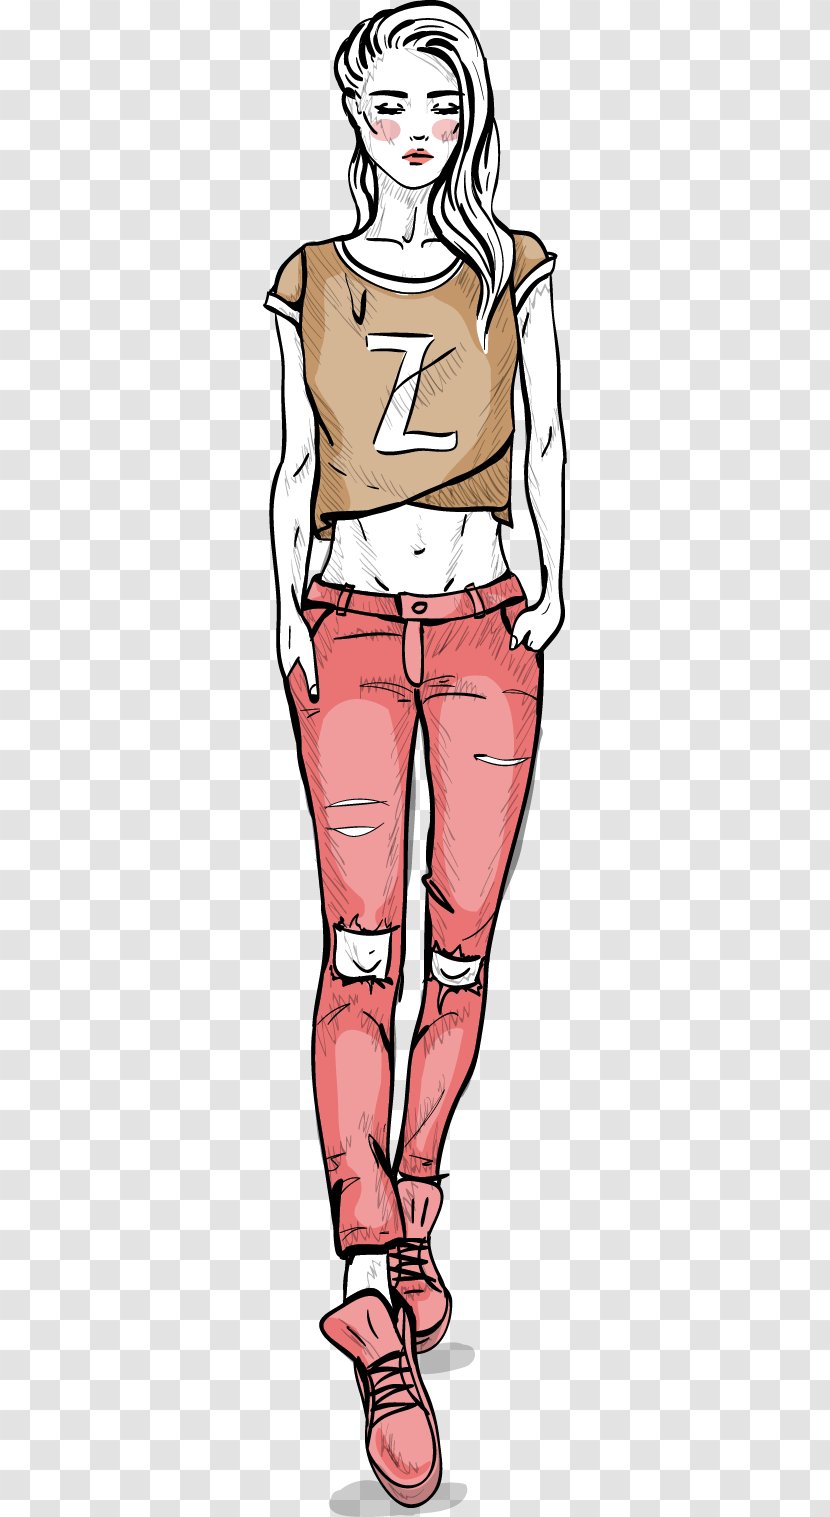 Clothing Euclidean Vector Illustration - Frame - Hand-painted Women Renderings Transparent PNG